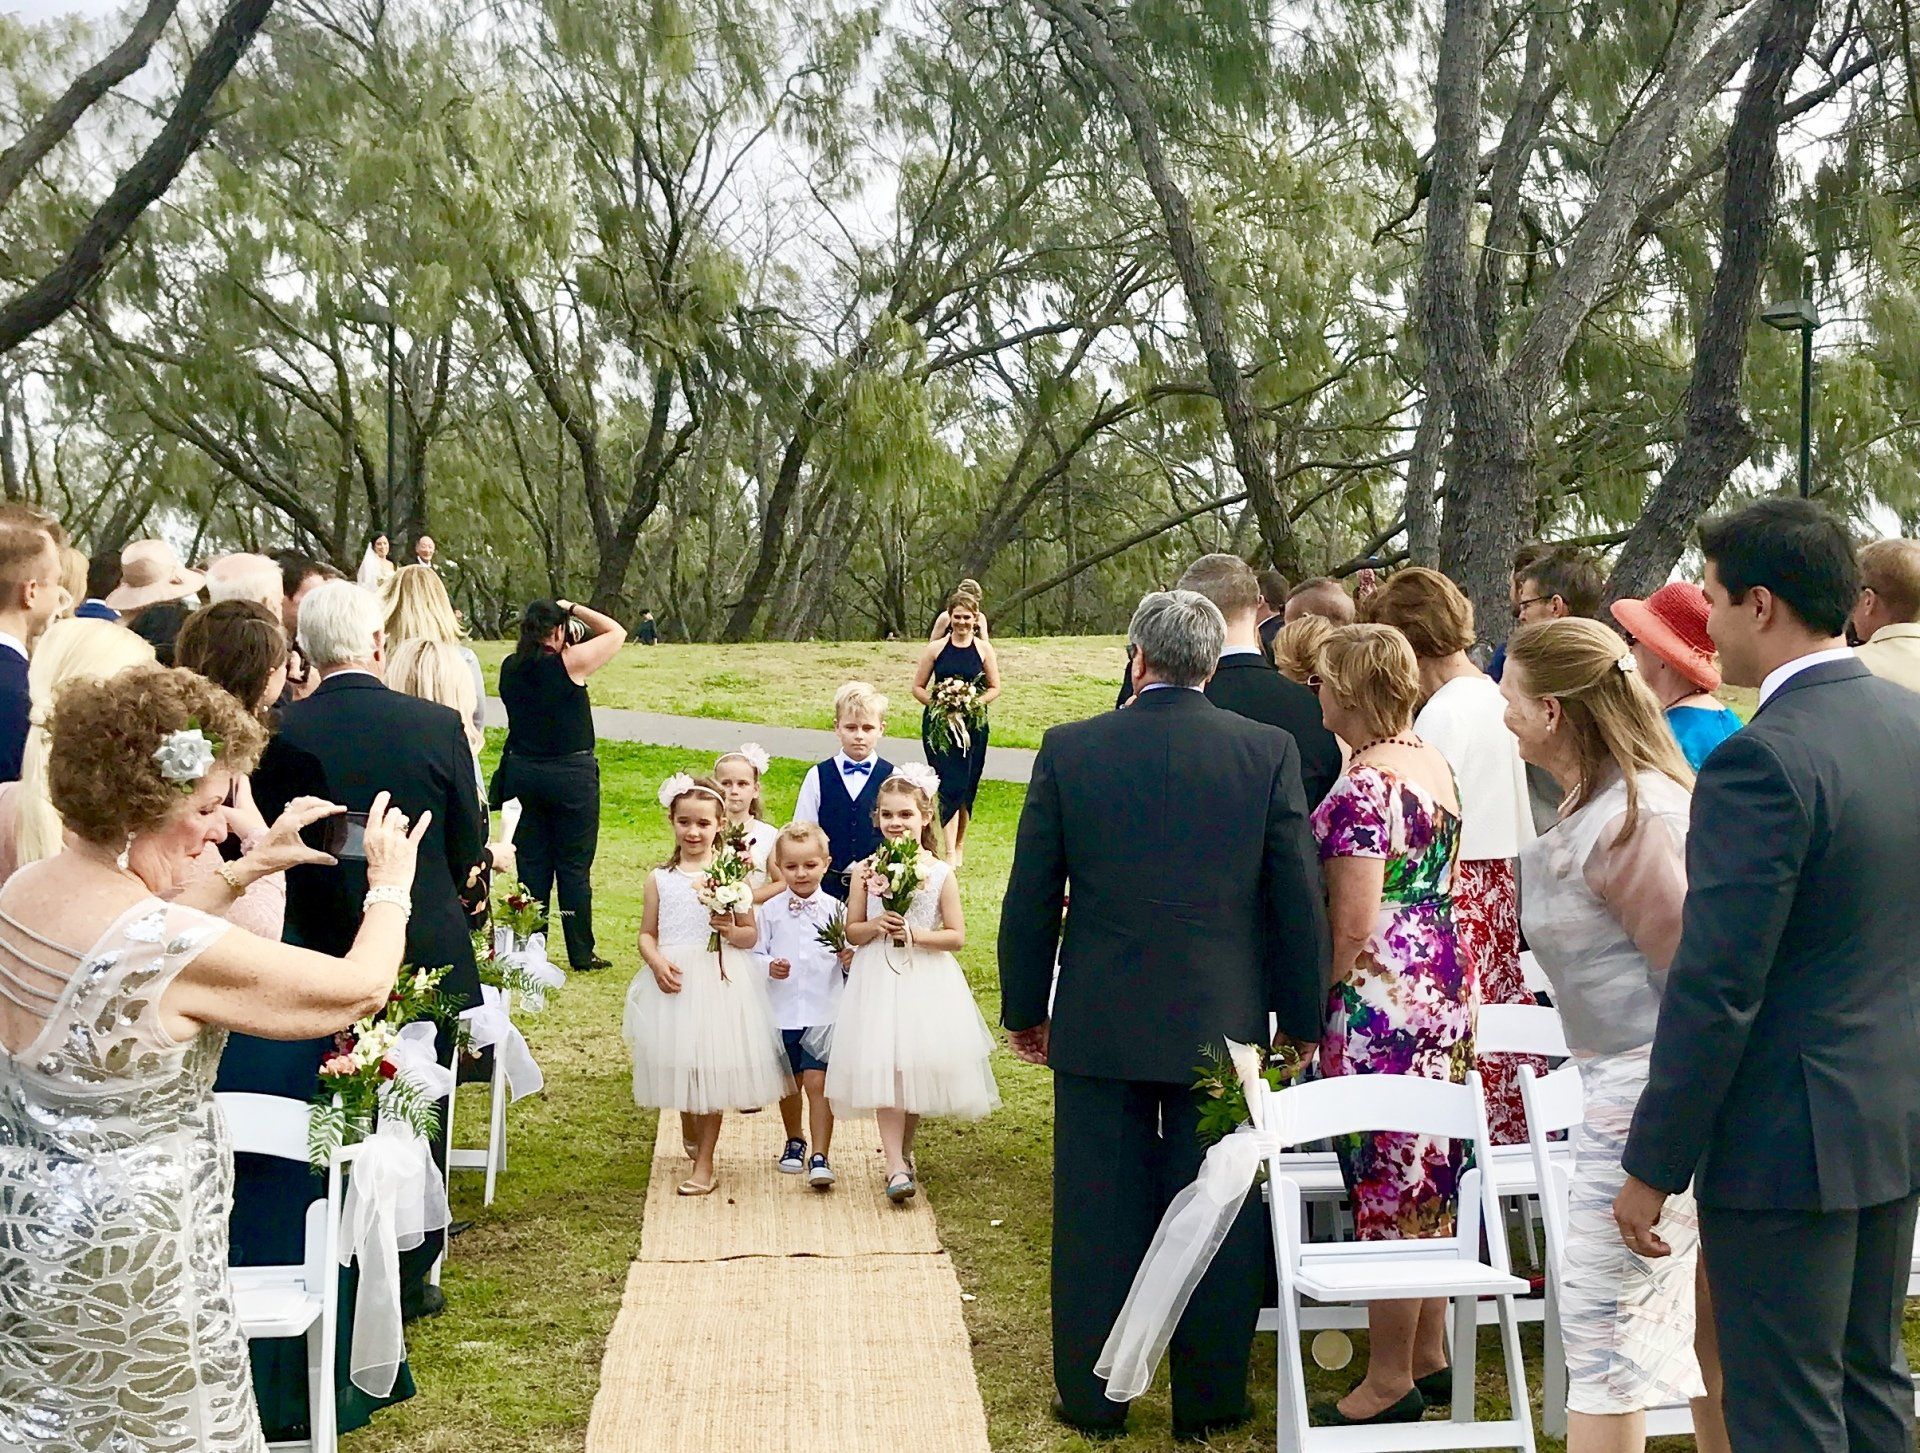 page boys and flower gilrs walk down the aisle with flowers before the bridesmaids in navy and the bride in white at Mooloolaba beach